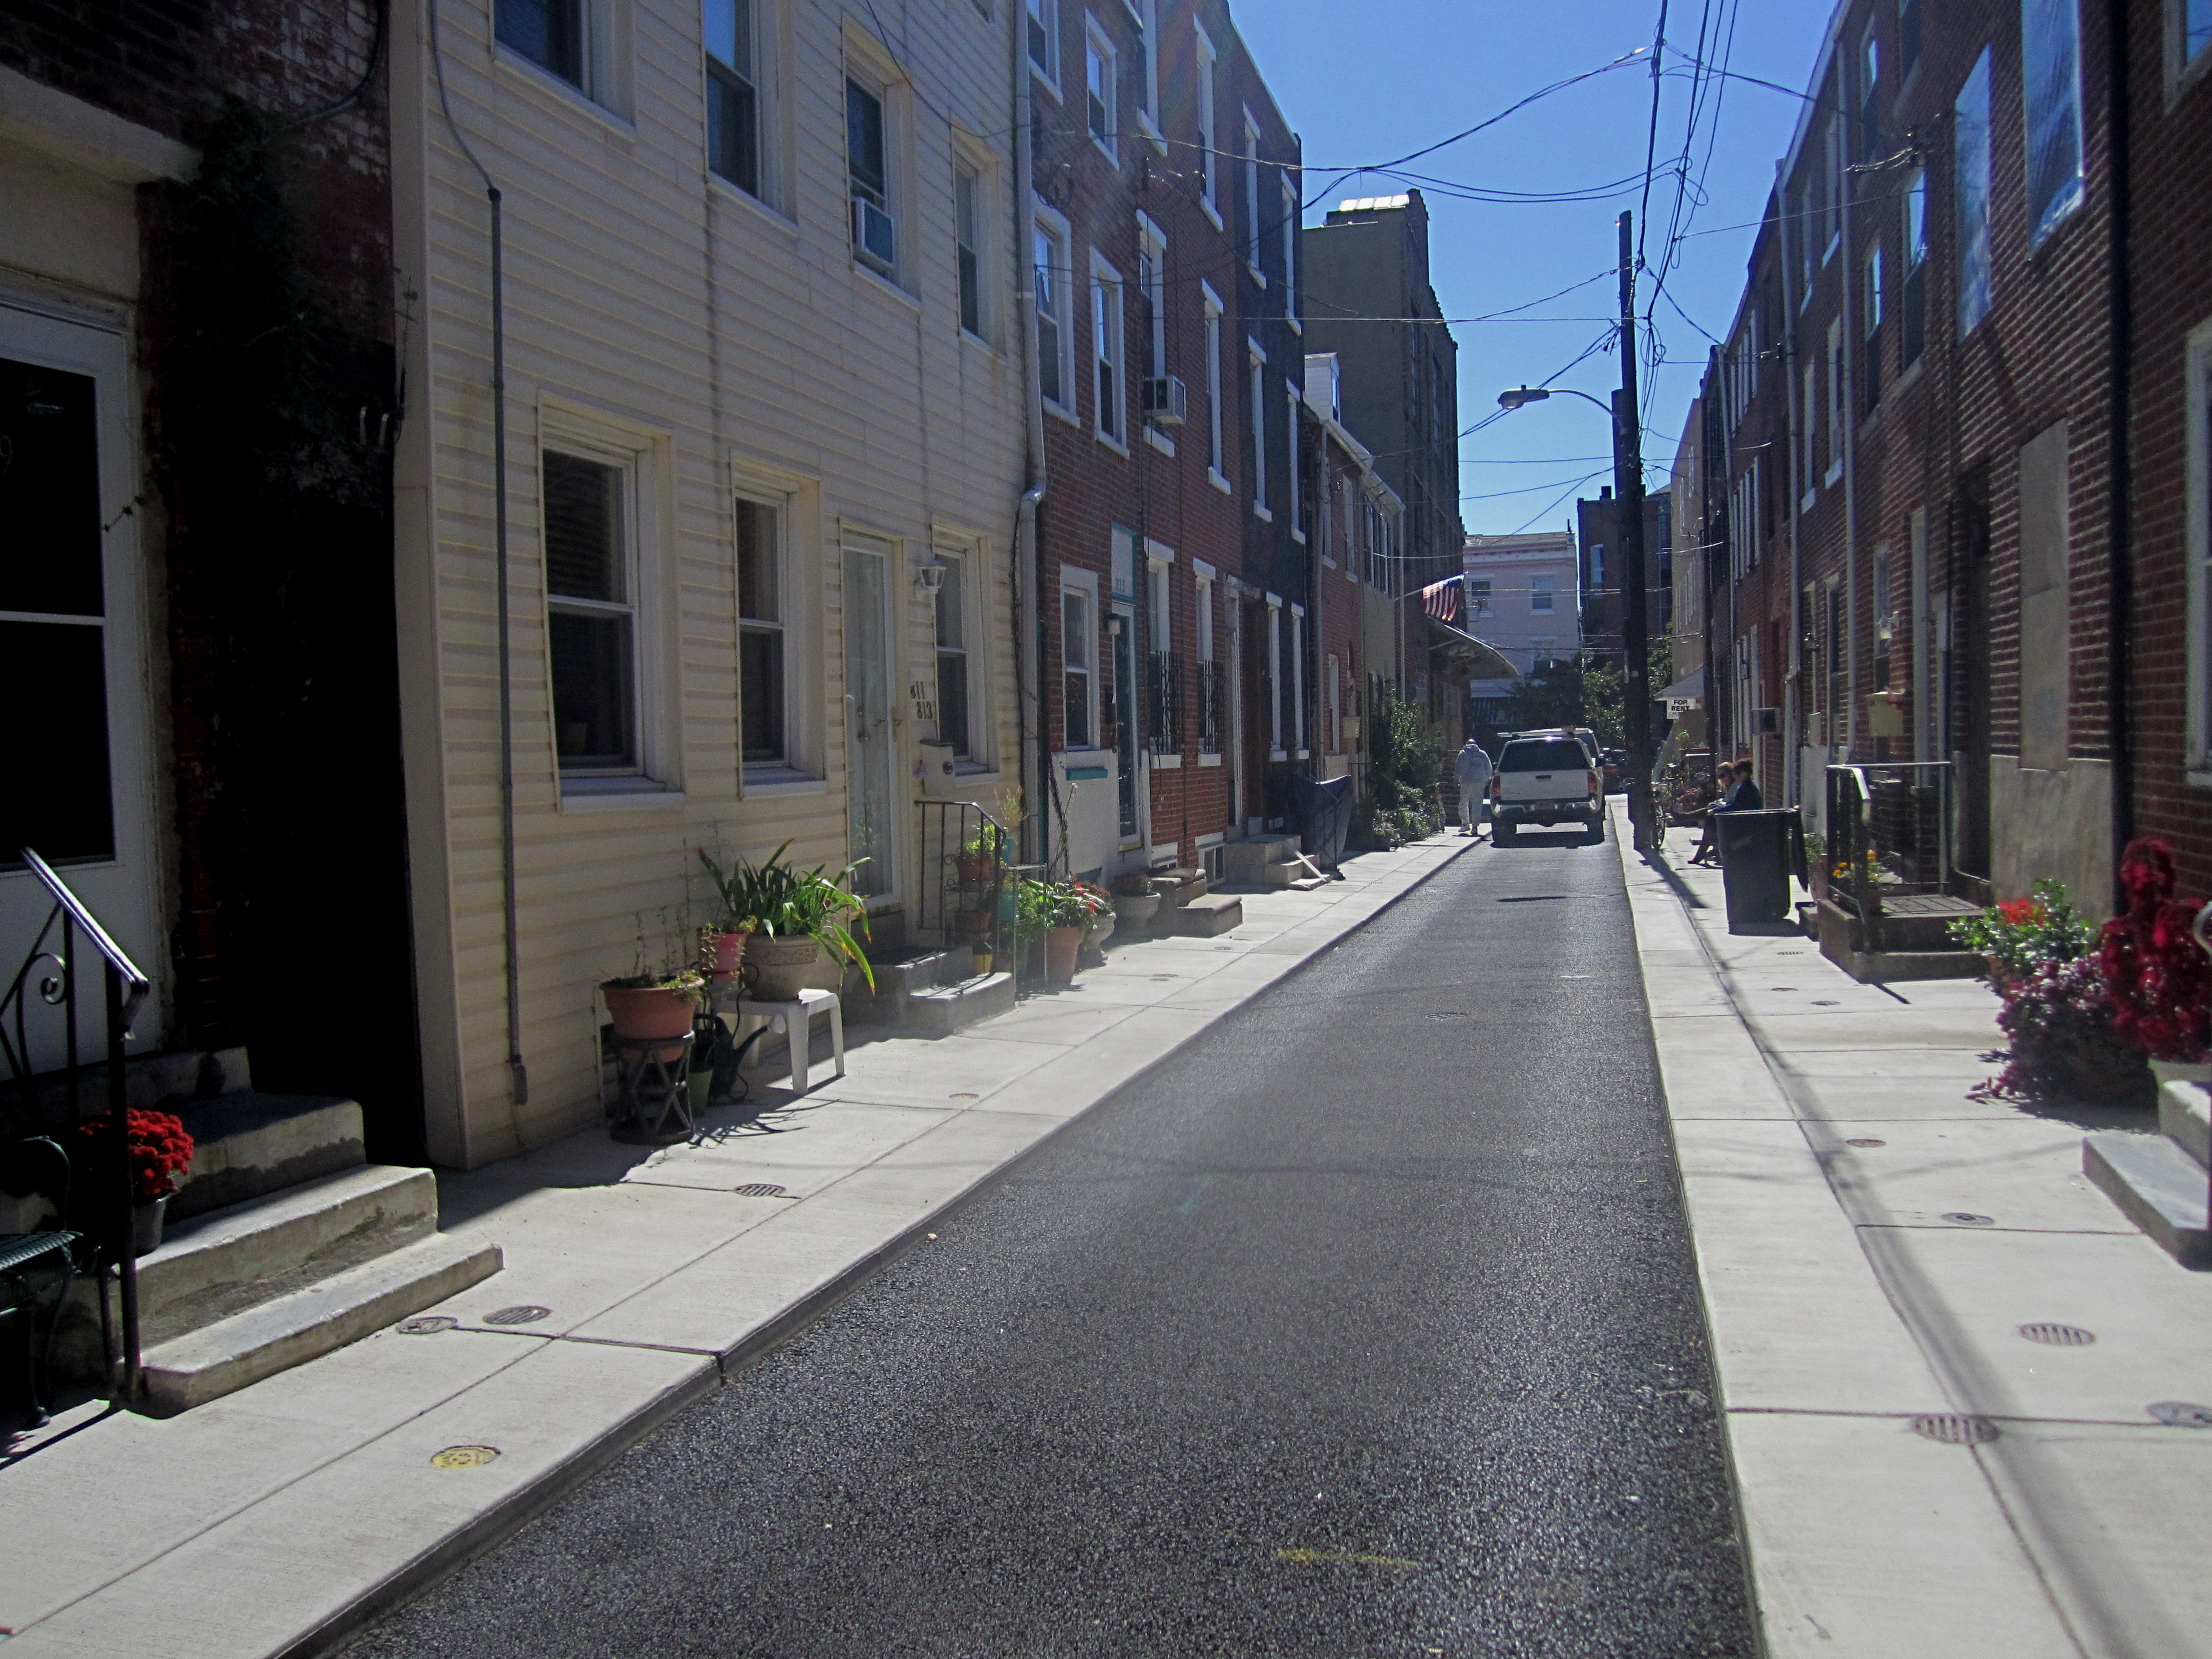 Percy Street is paved with porous asphalt which feeds into a stone bed below